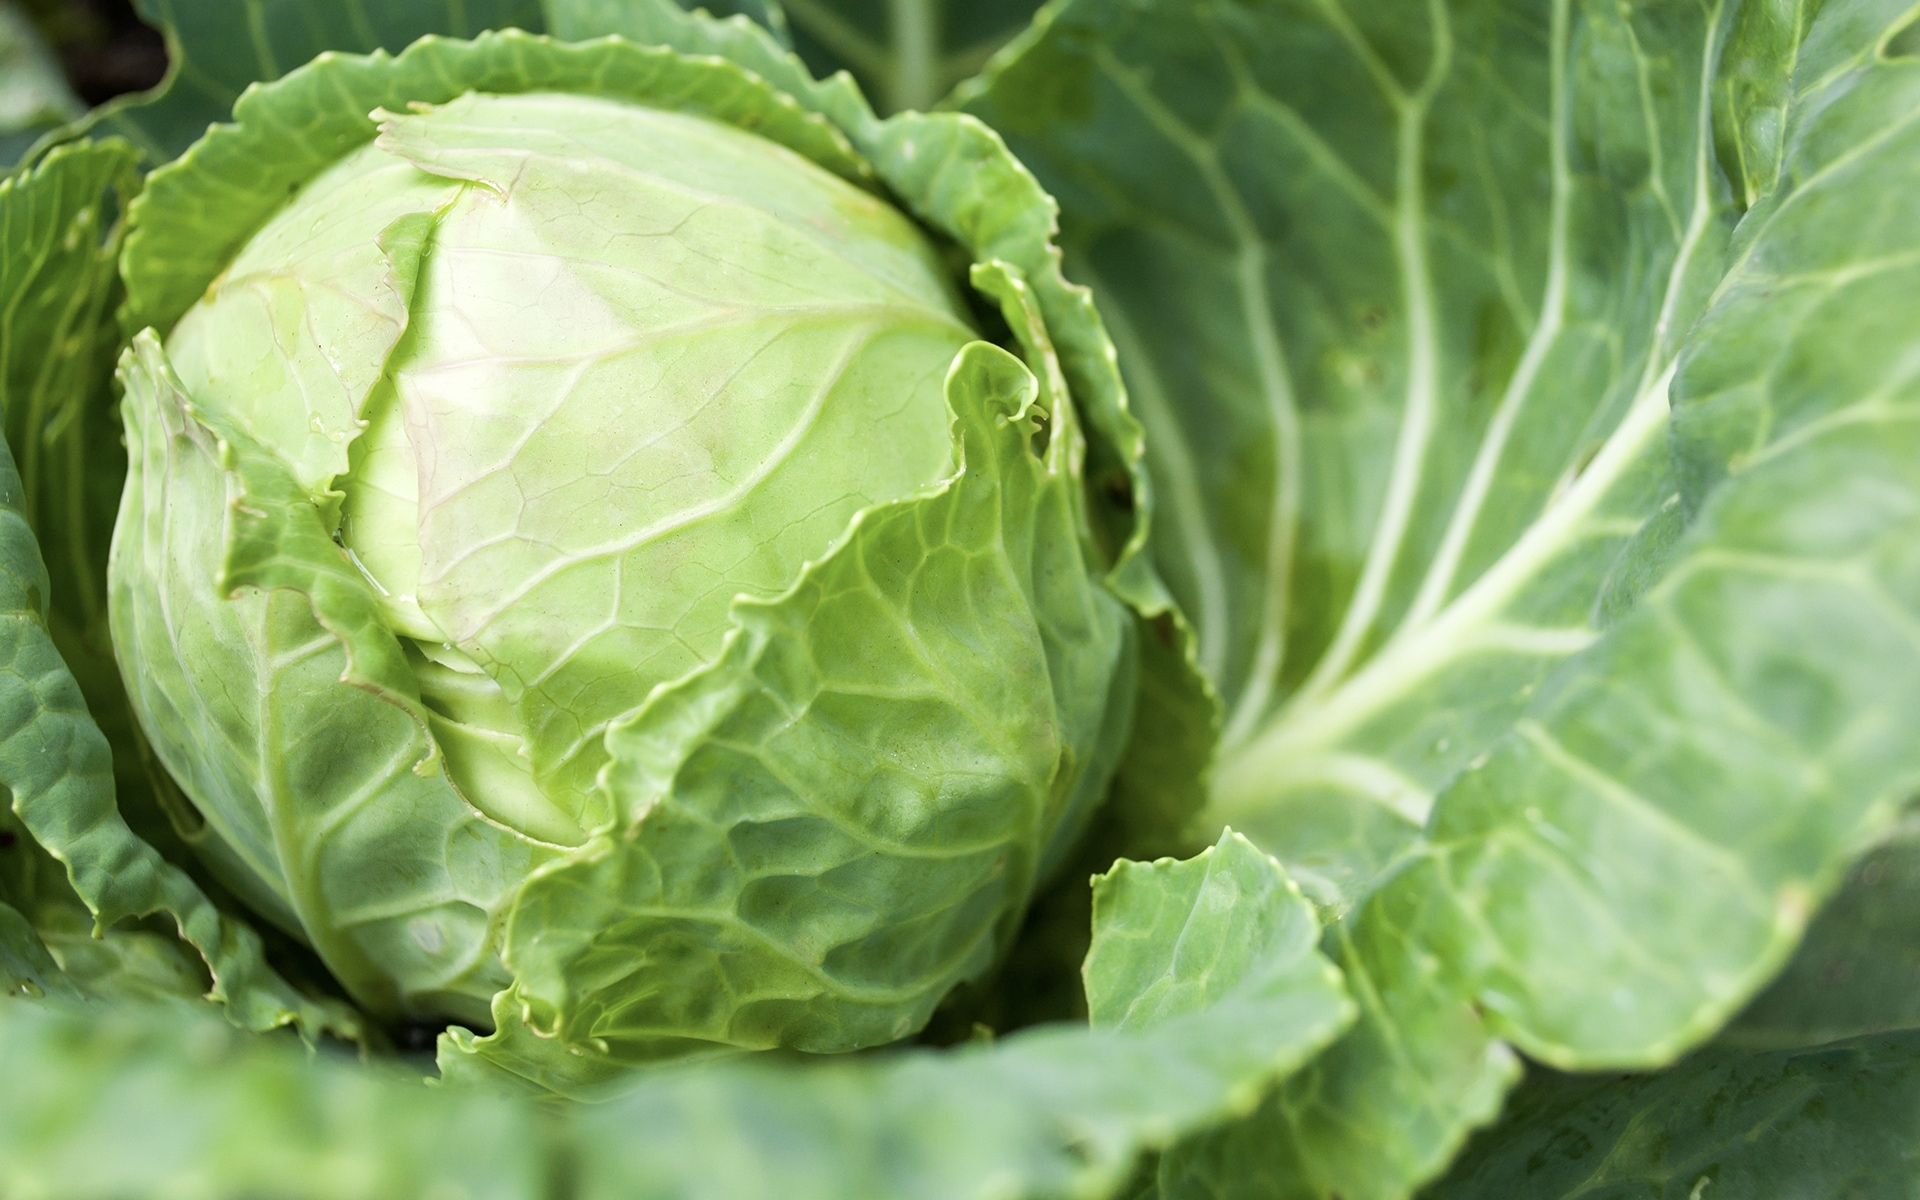 Overhead shot of a mature cabbage head